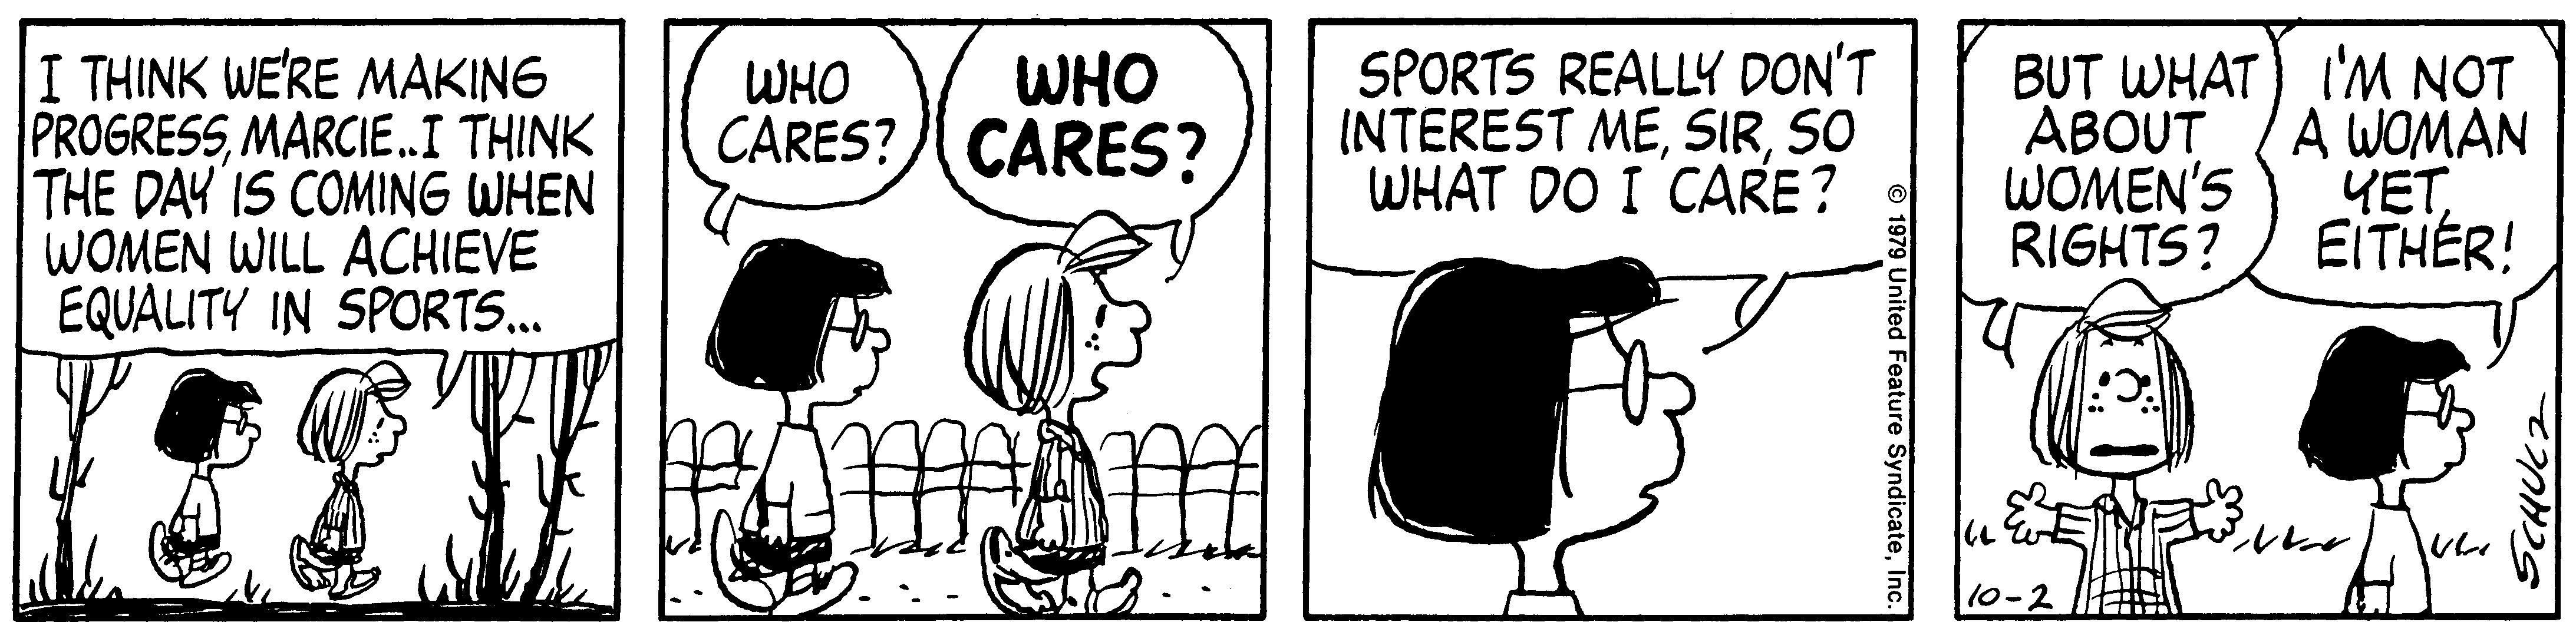 peppermint-patty-marcie-womens-rights-sports.jpg